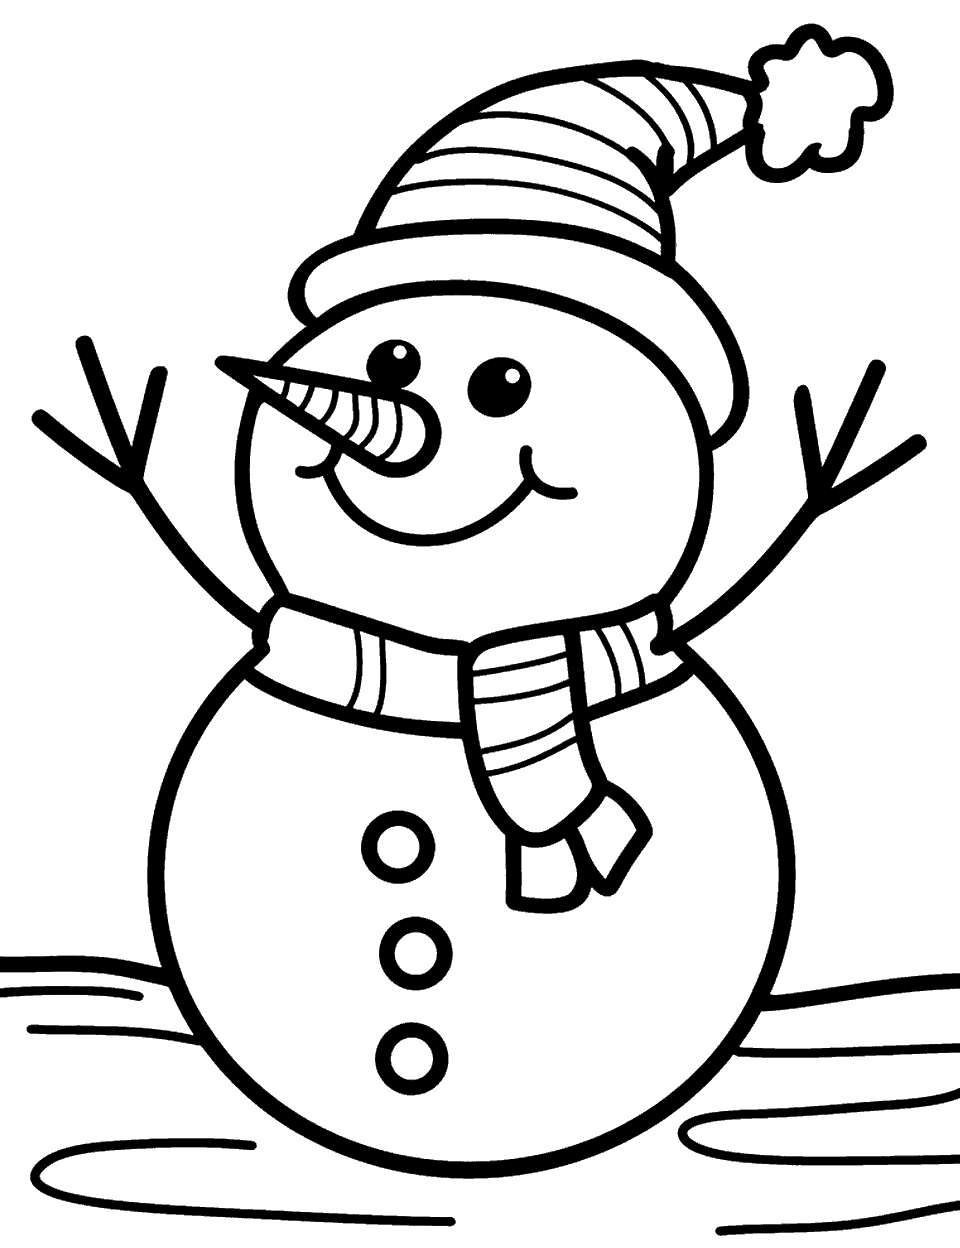 Snowman Coloring Page - A simple snowman easy for coloring.